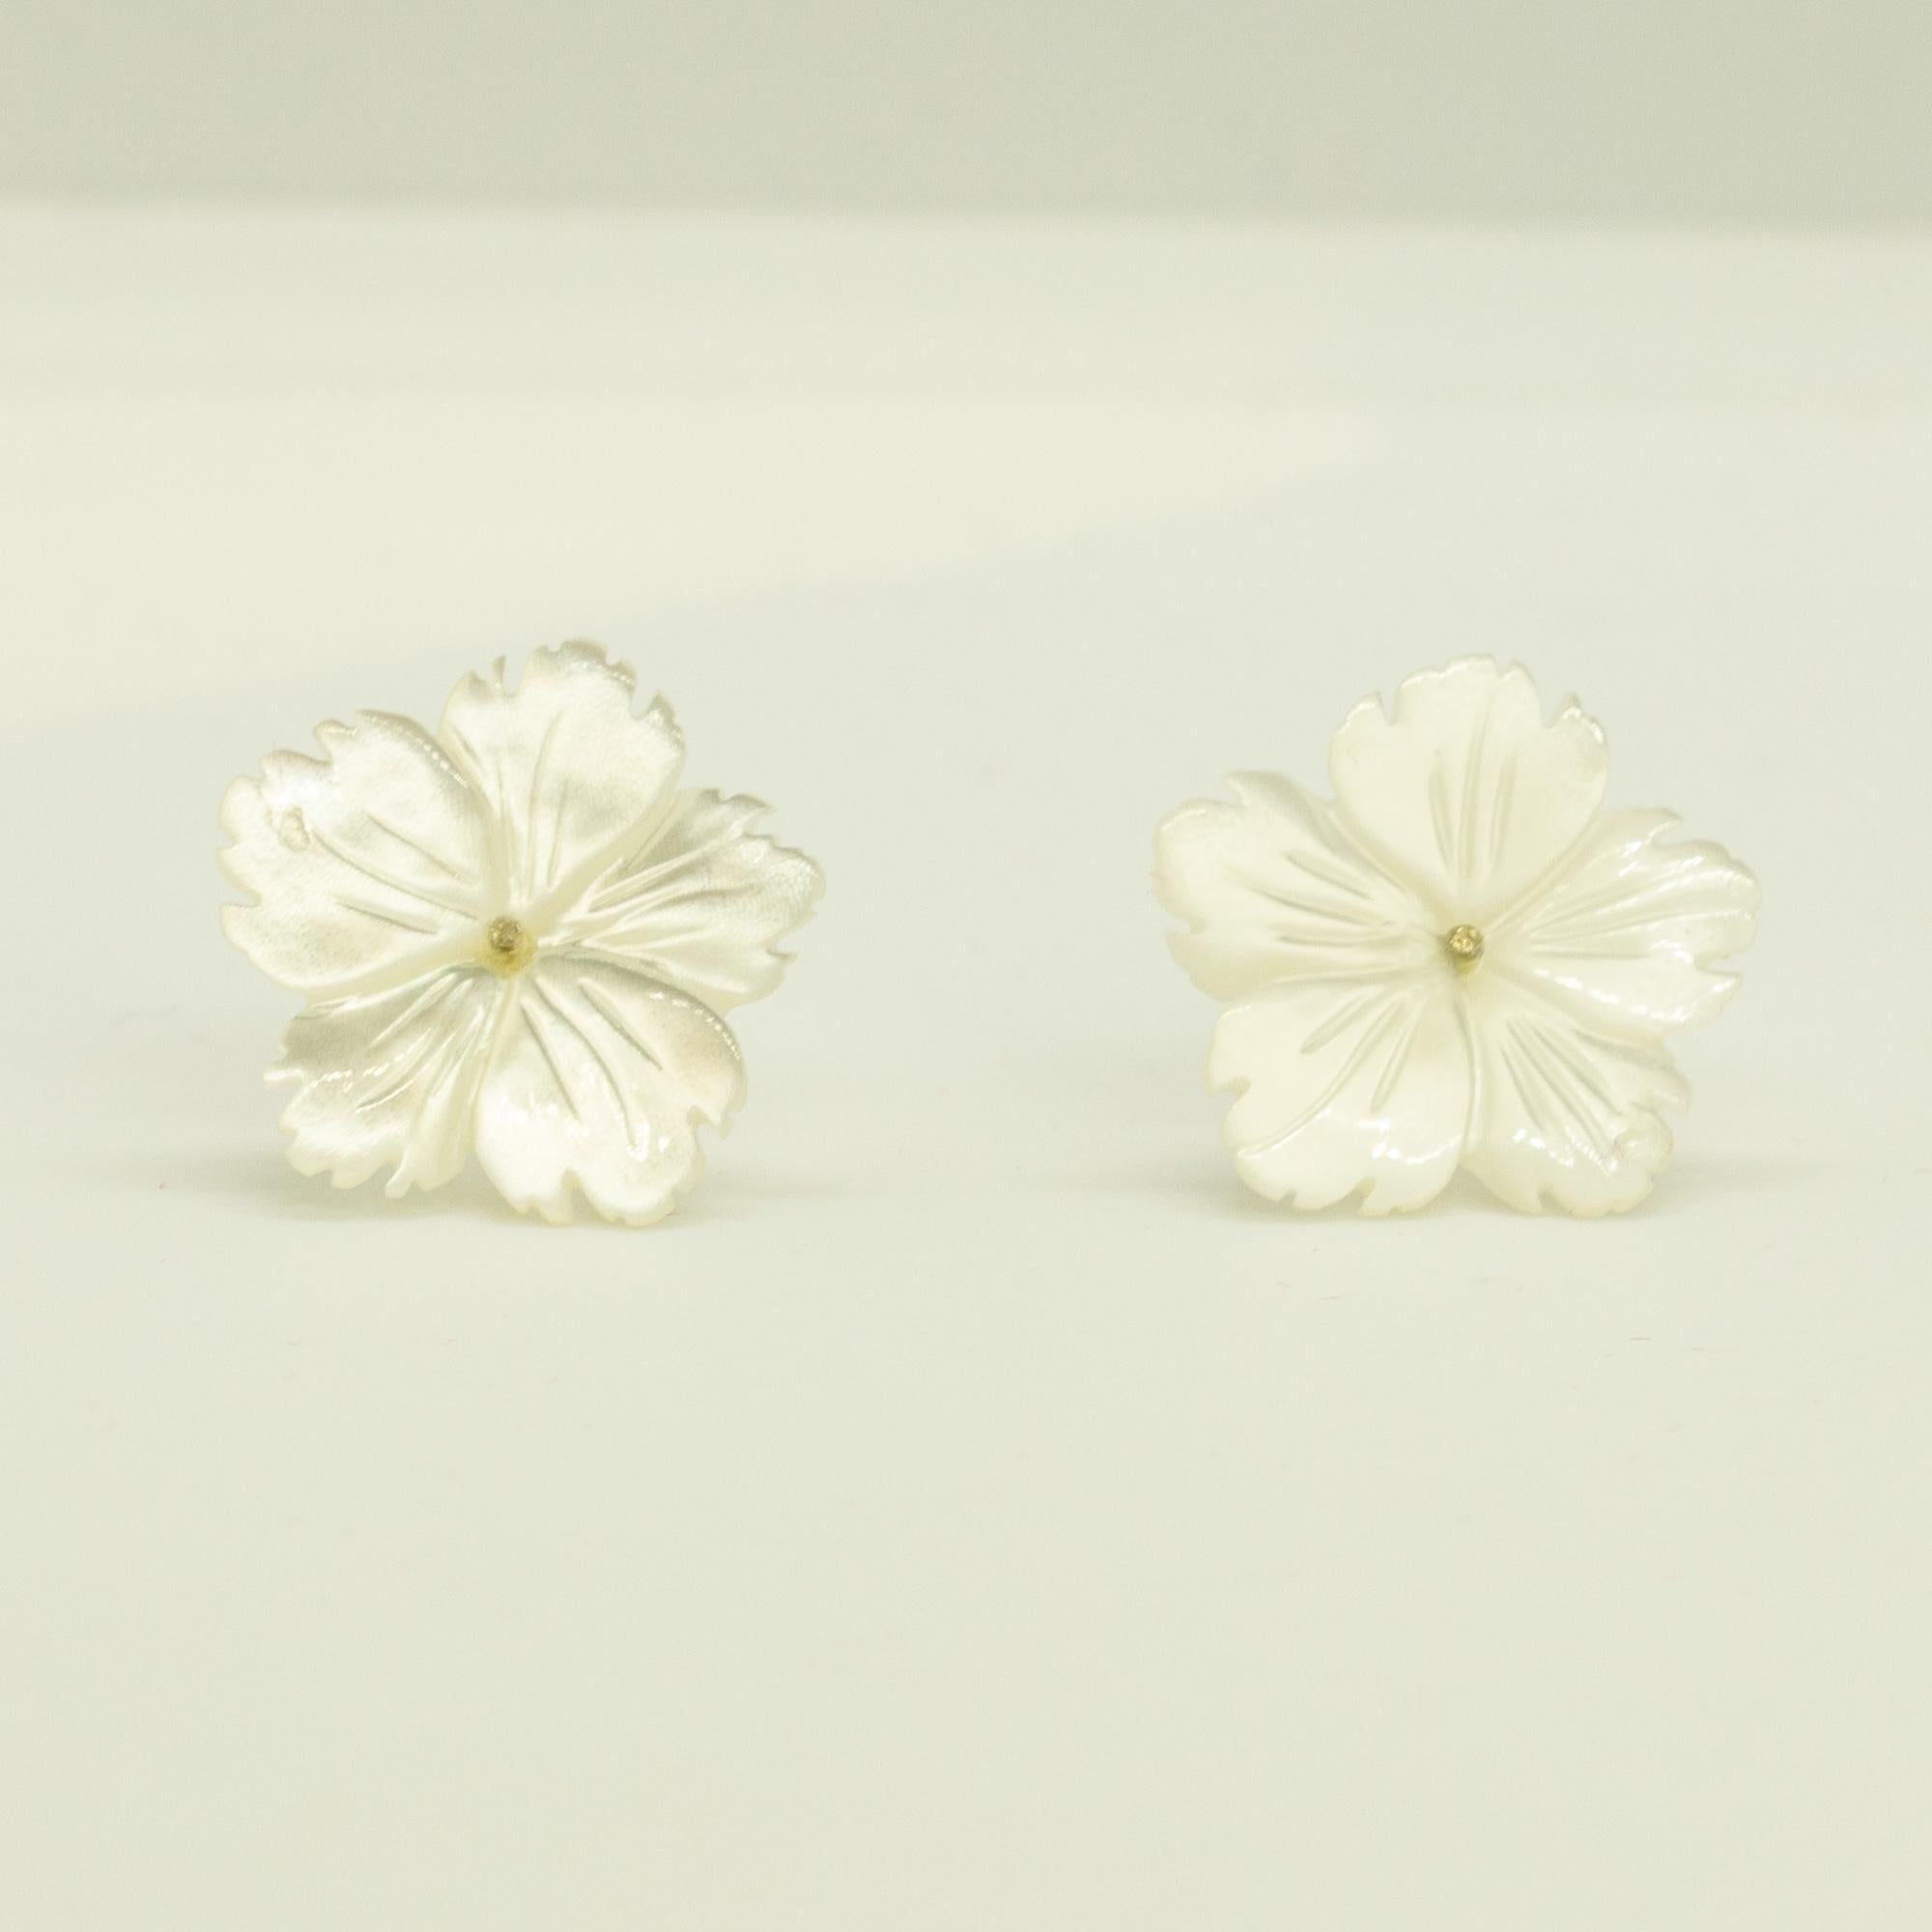 Astonishing and gorgeouis white mother pearl flower stud earrings. Natural carved petals that evoke the italian handmade traditional jewelry work.
 
This delicate design shows the sweetness and innocence of the jewelry. It takes us to those first